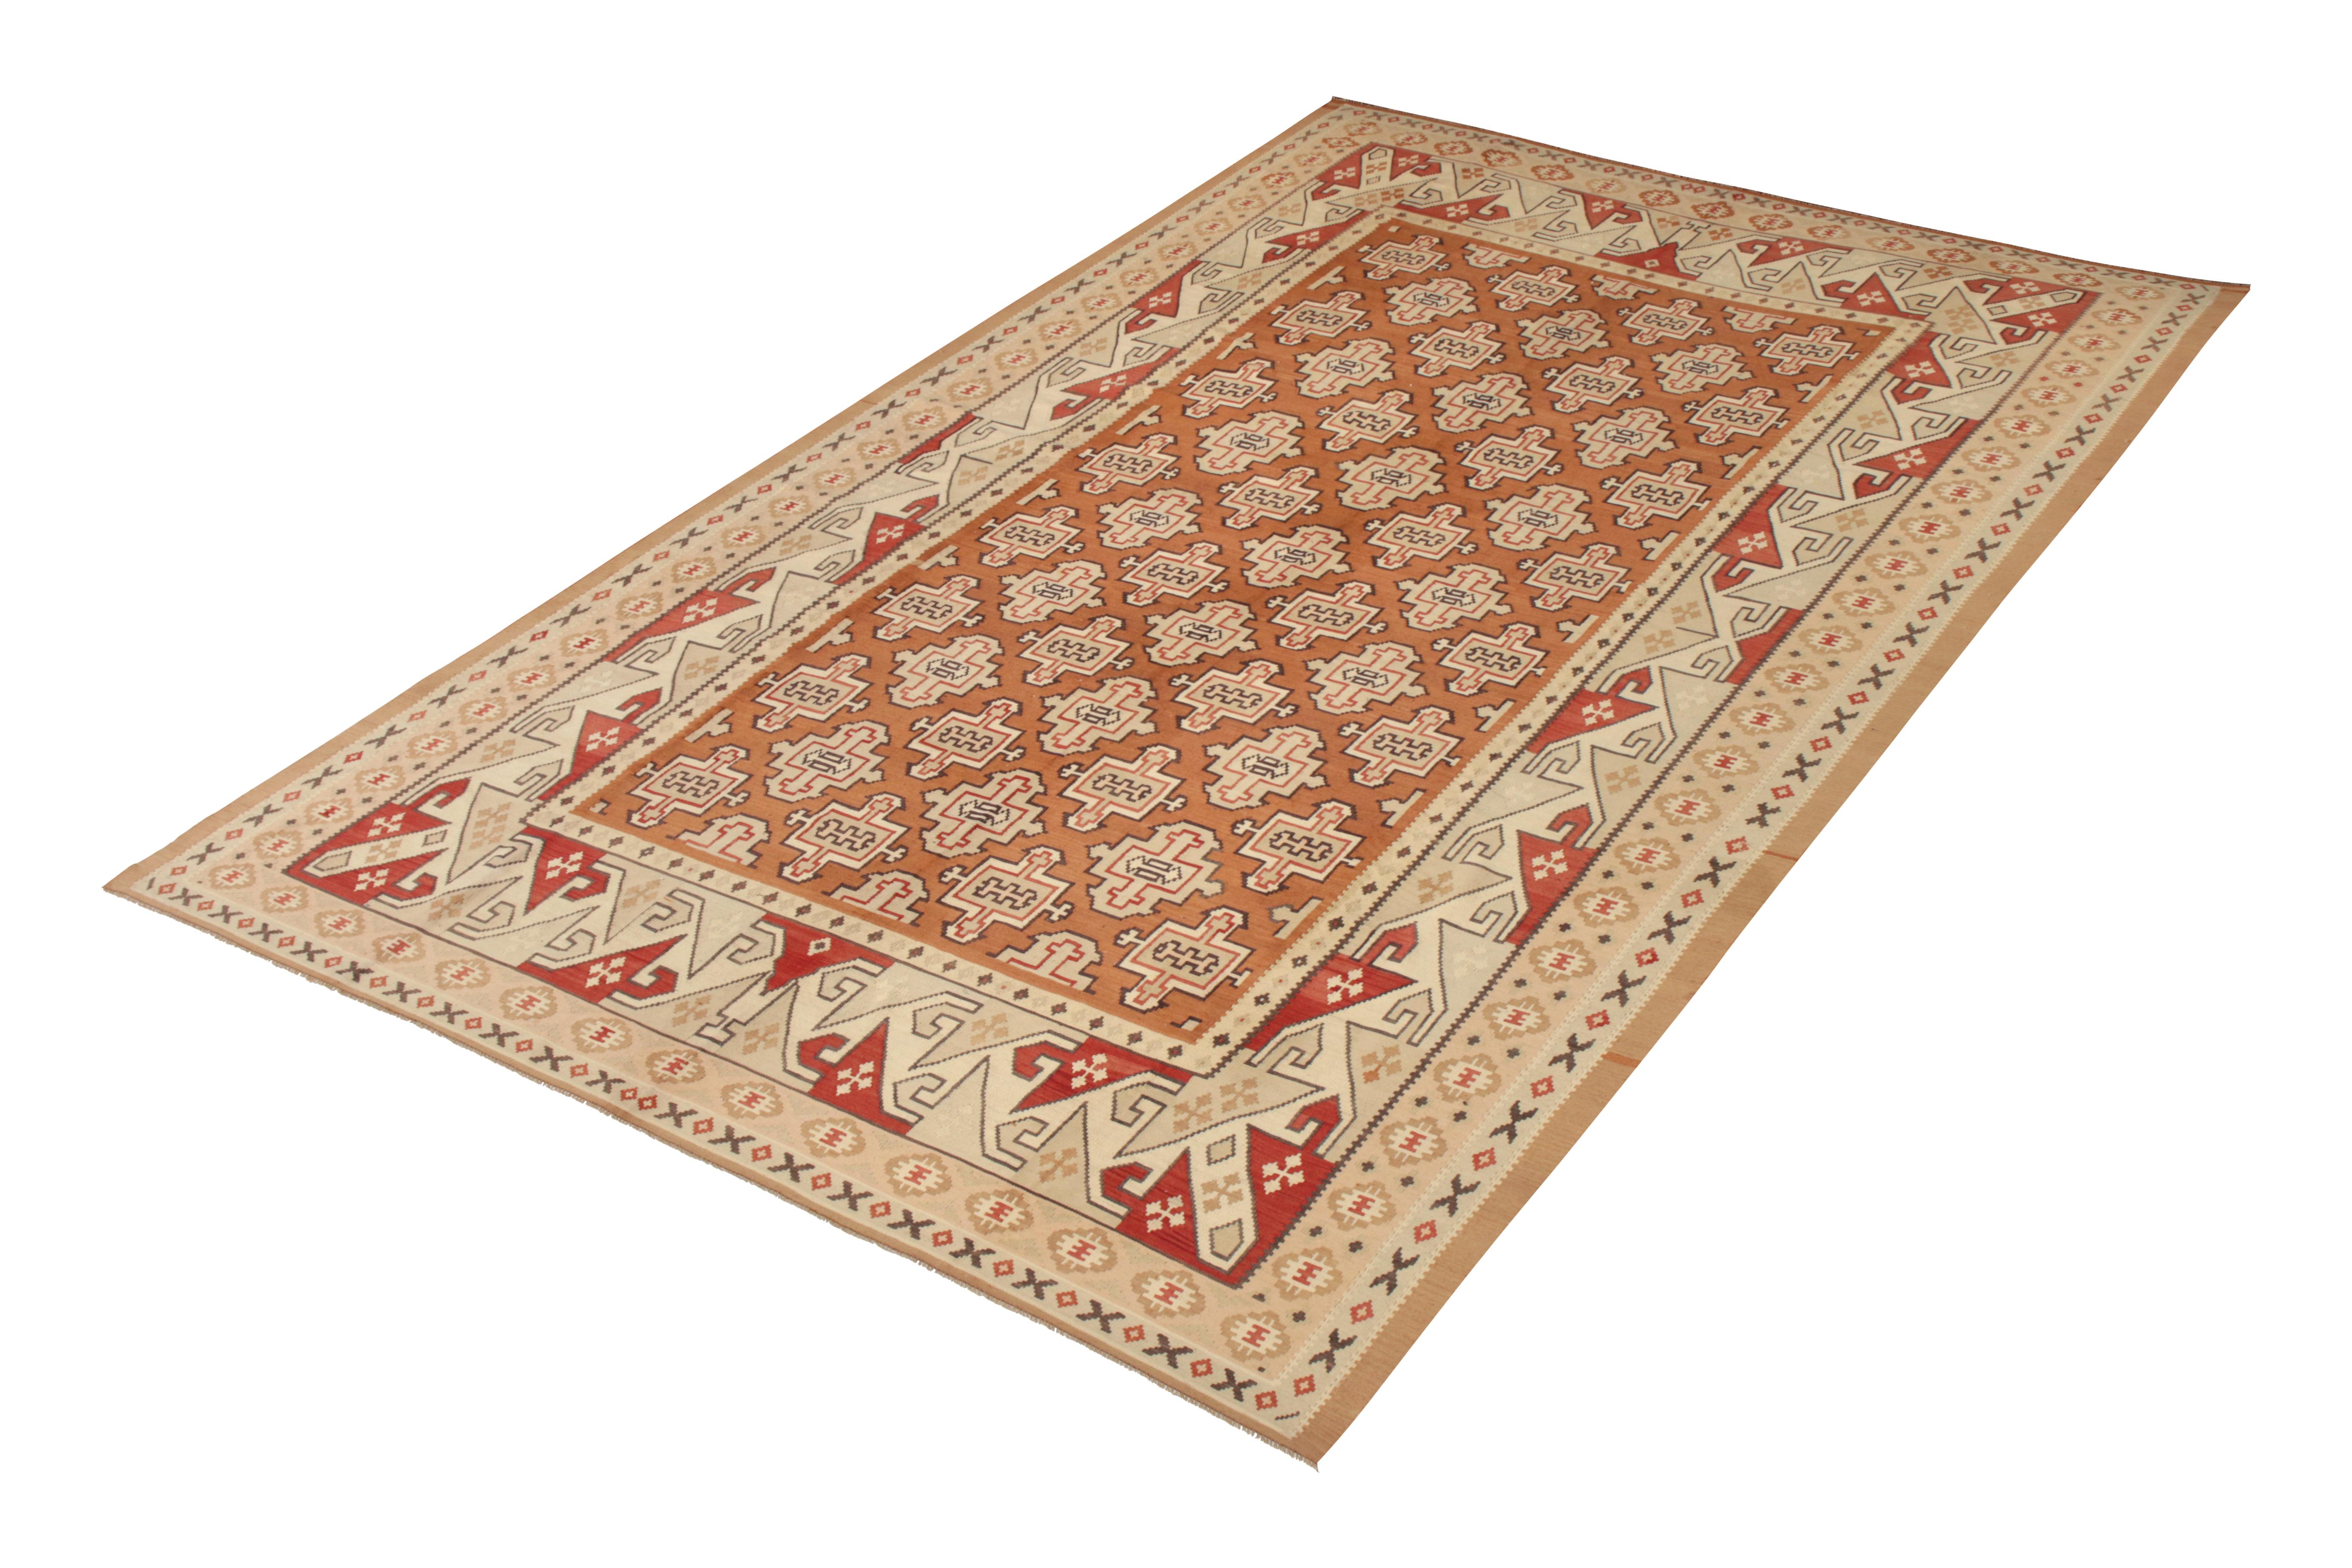 Handwoven in a wool flat-weave originating from Turkey circa 1950-1960, this vintage rug connotes a midcentury Kilim rug design of subtle rarity, drawing from classic traditional Kilim geometry to depict a very subdued Bessarabian Kilim sensibility